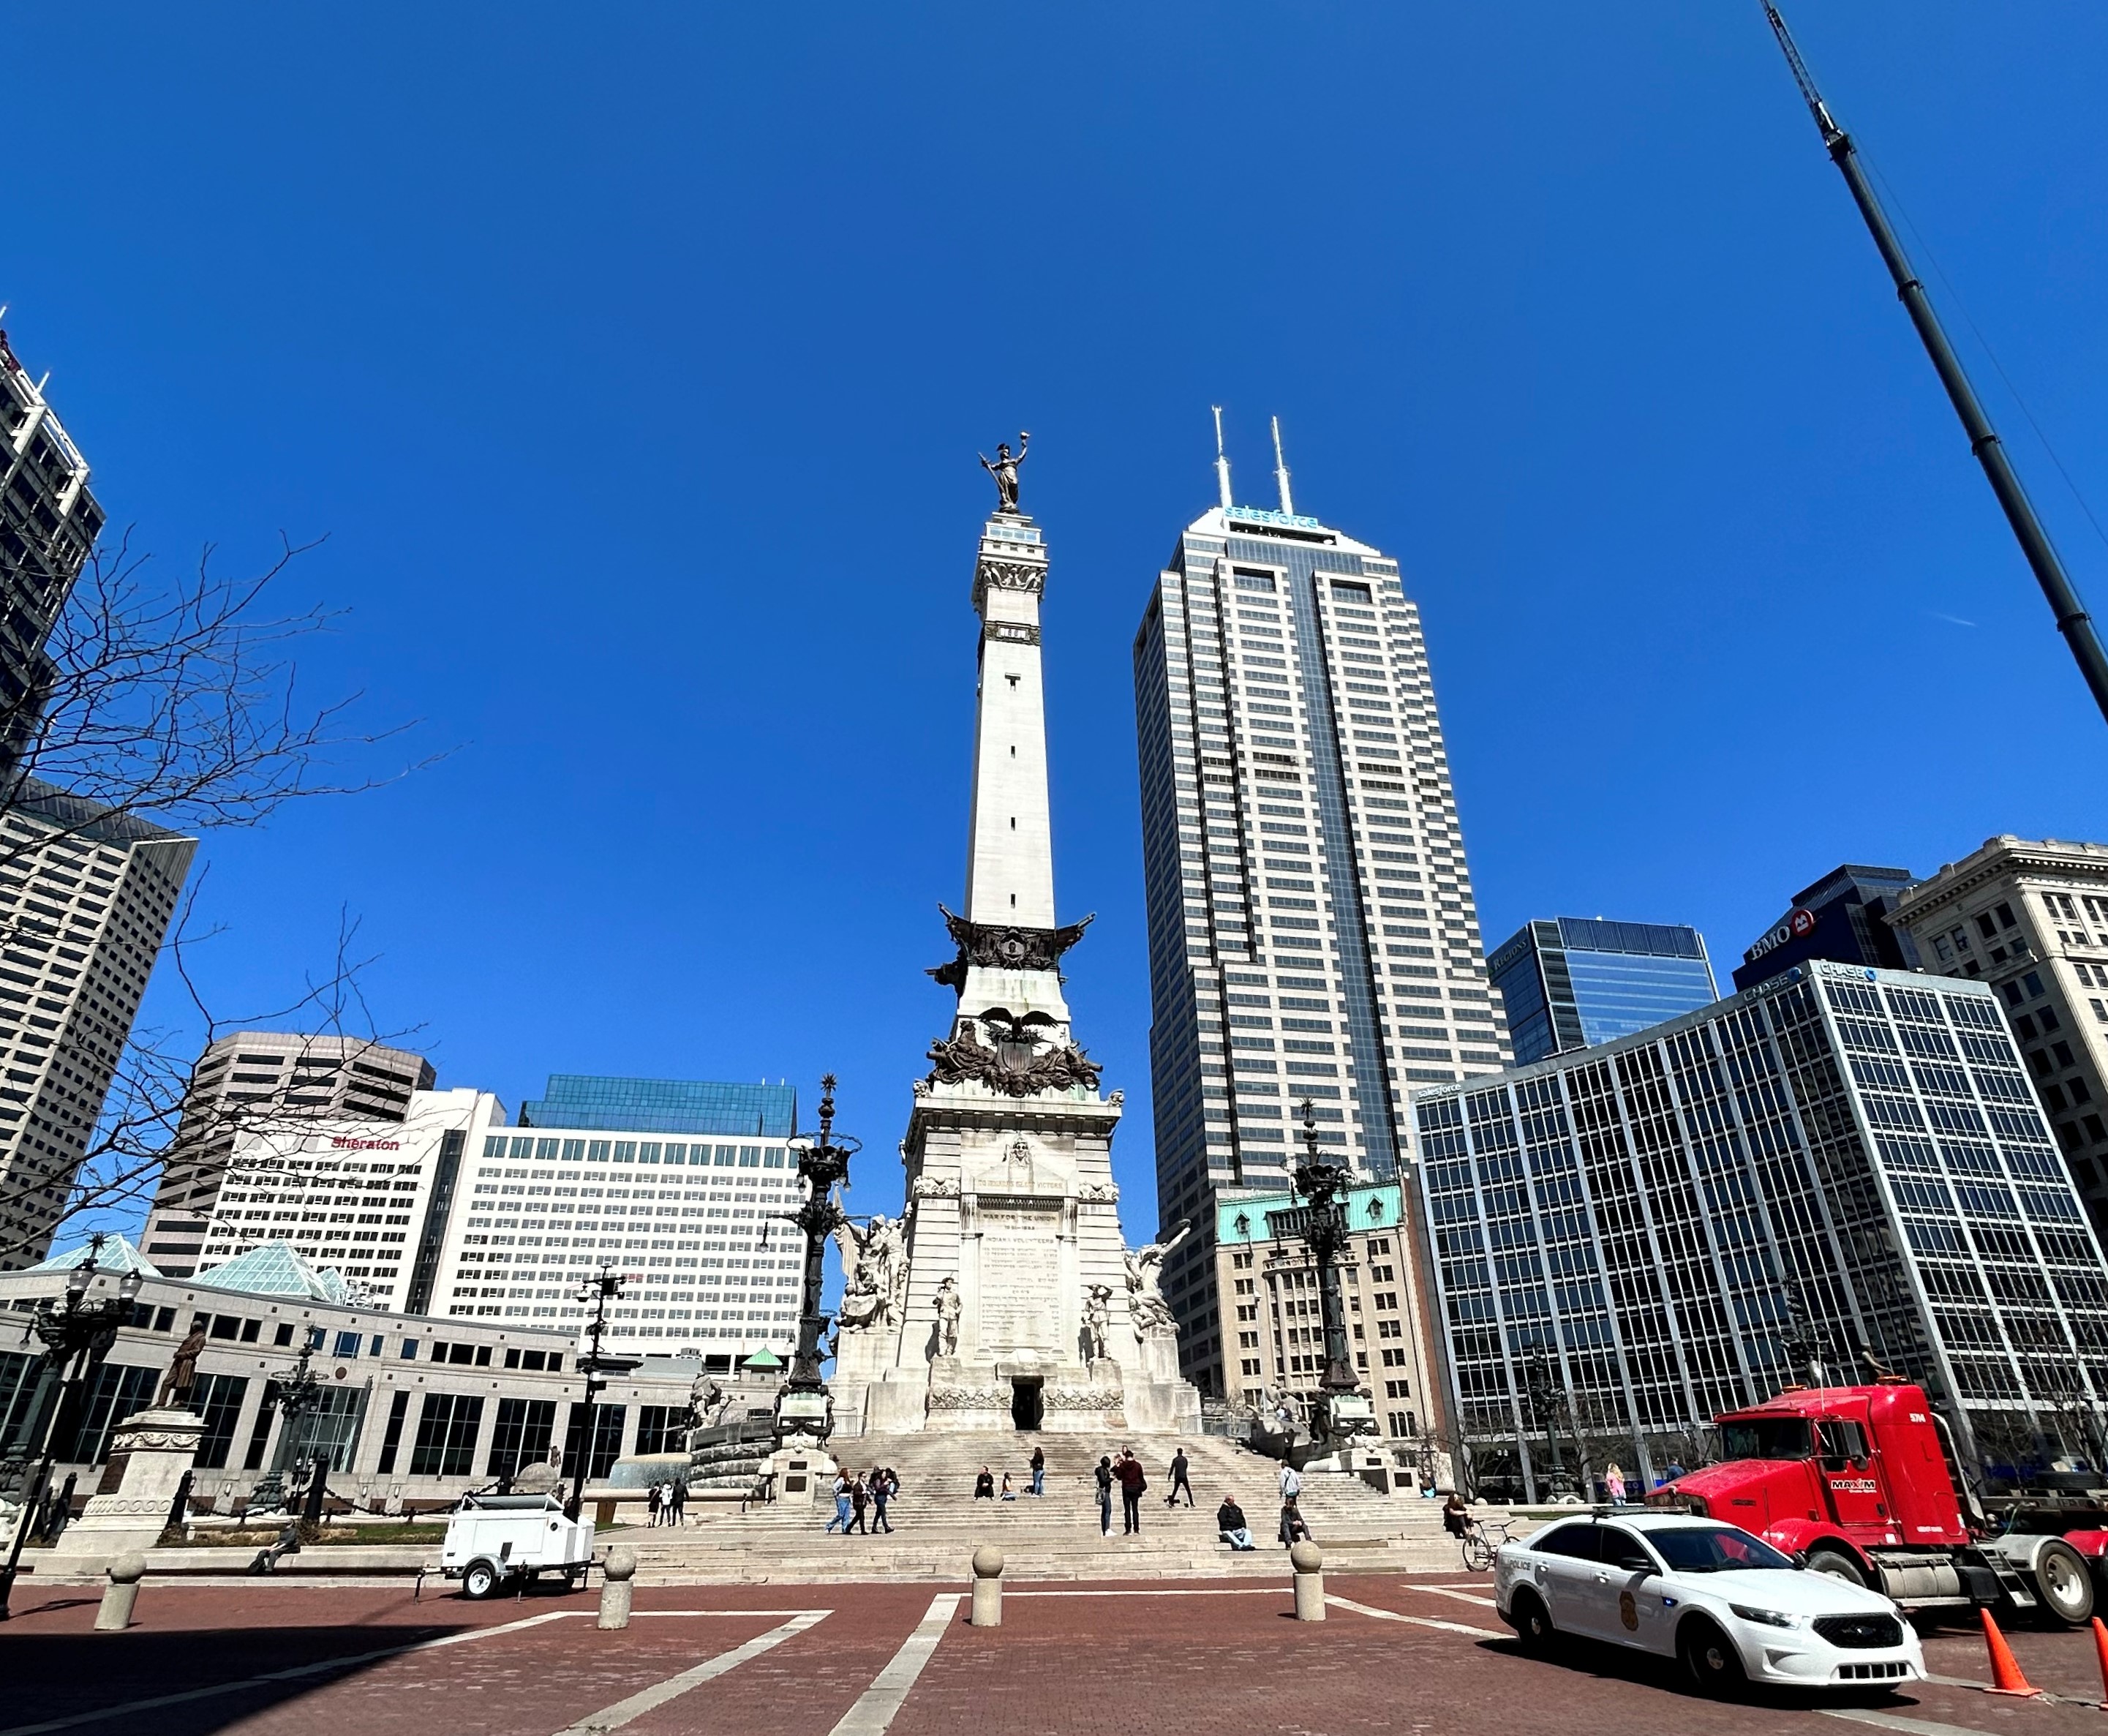 "Downtown Indianapolis"